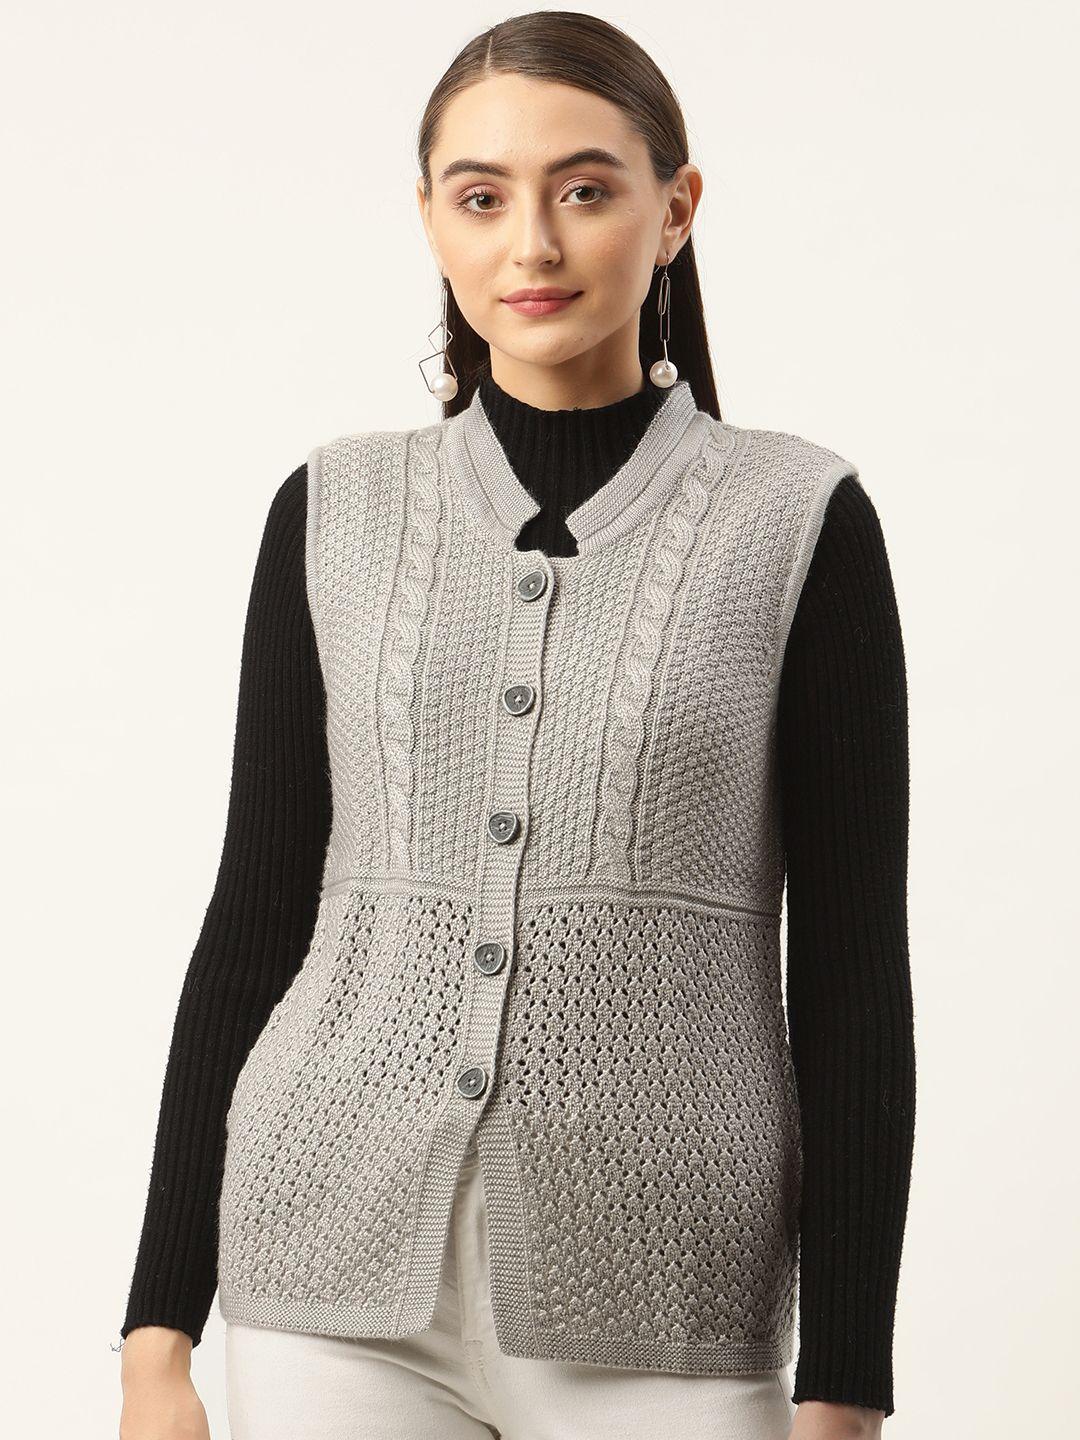 apsley-women-grey-cable-knit-cardigan